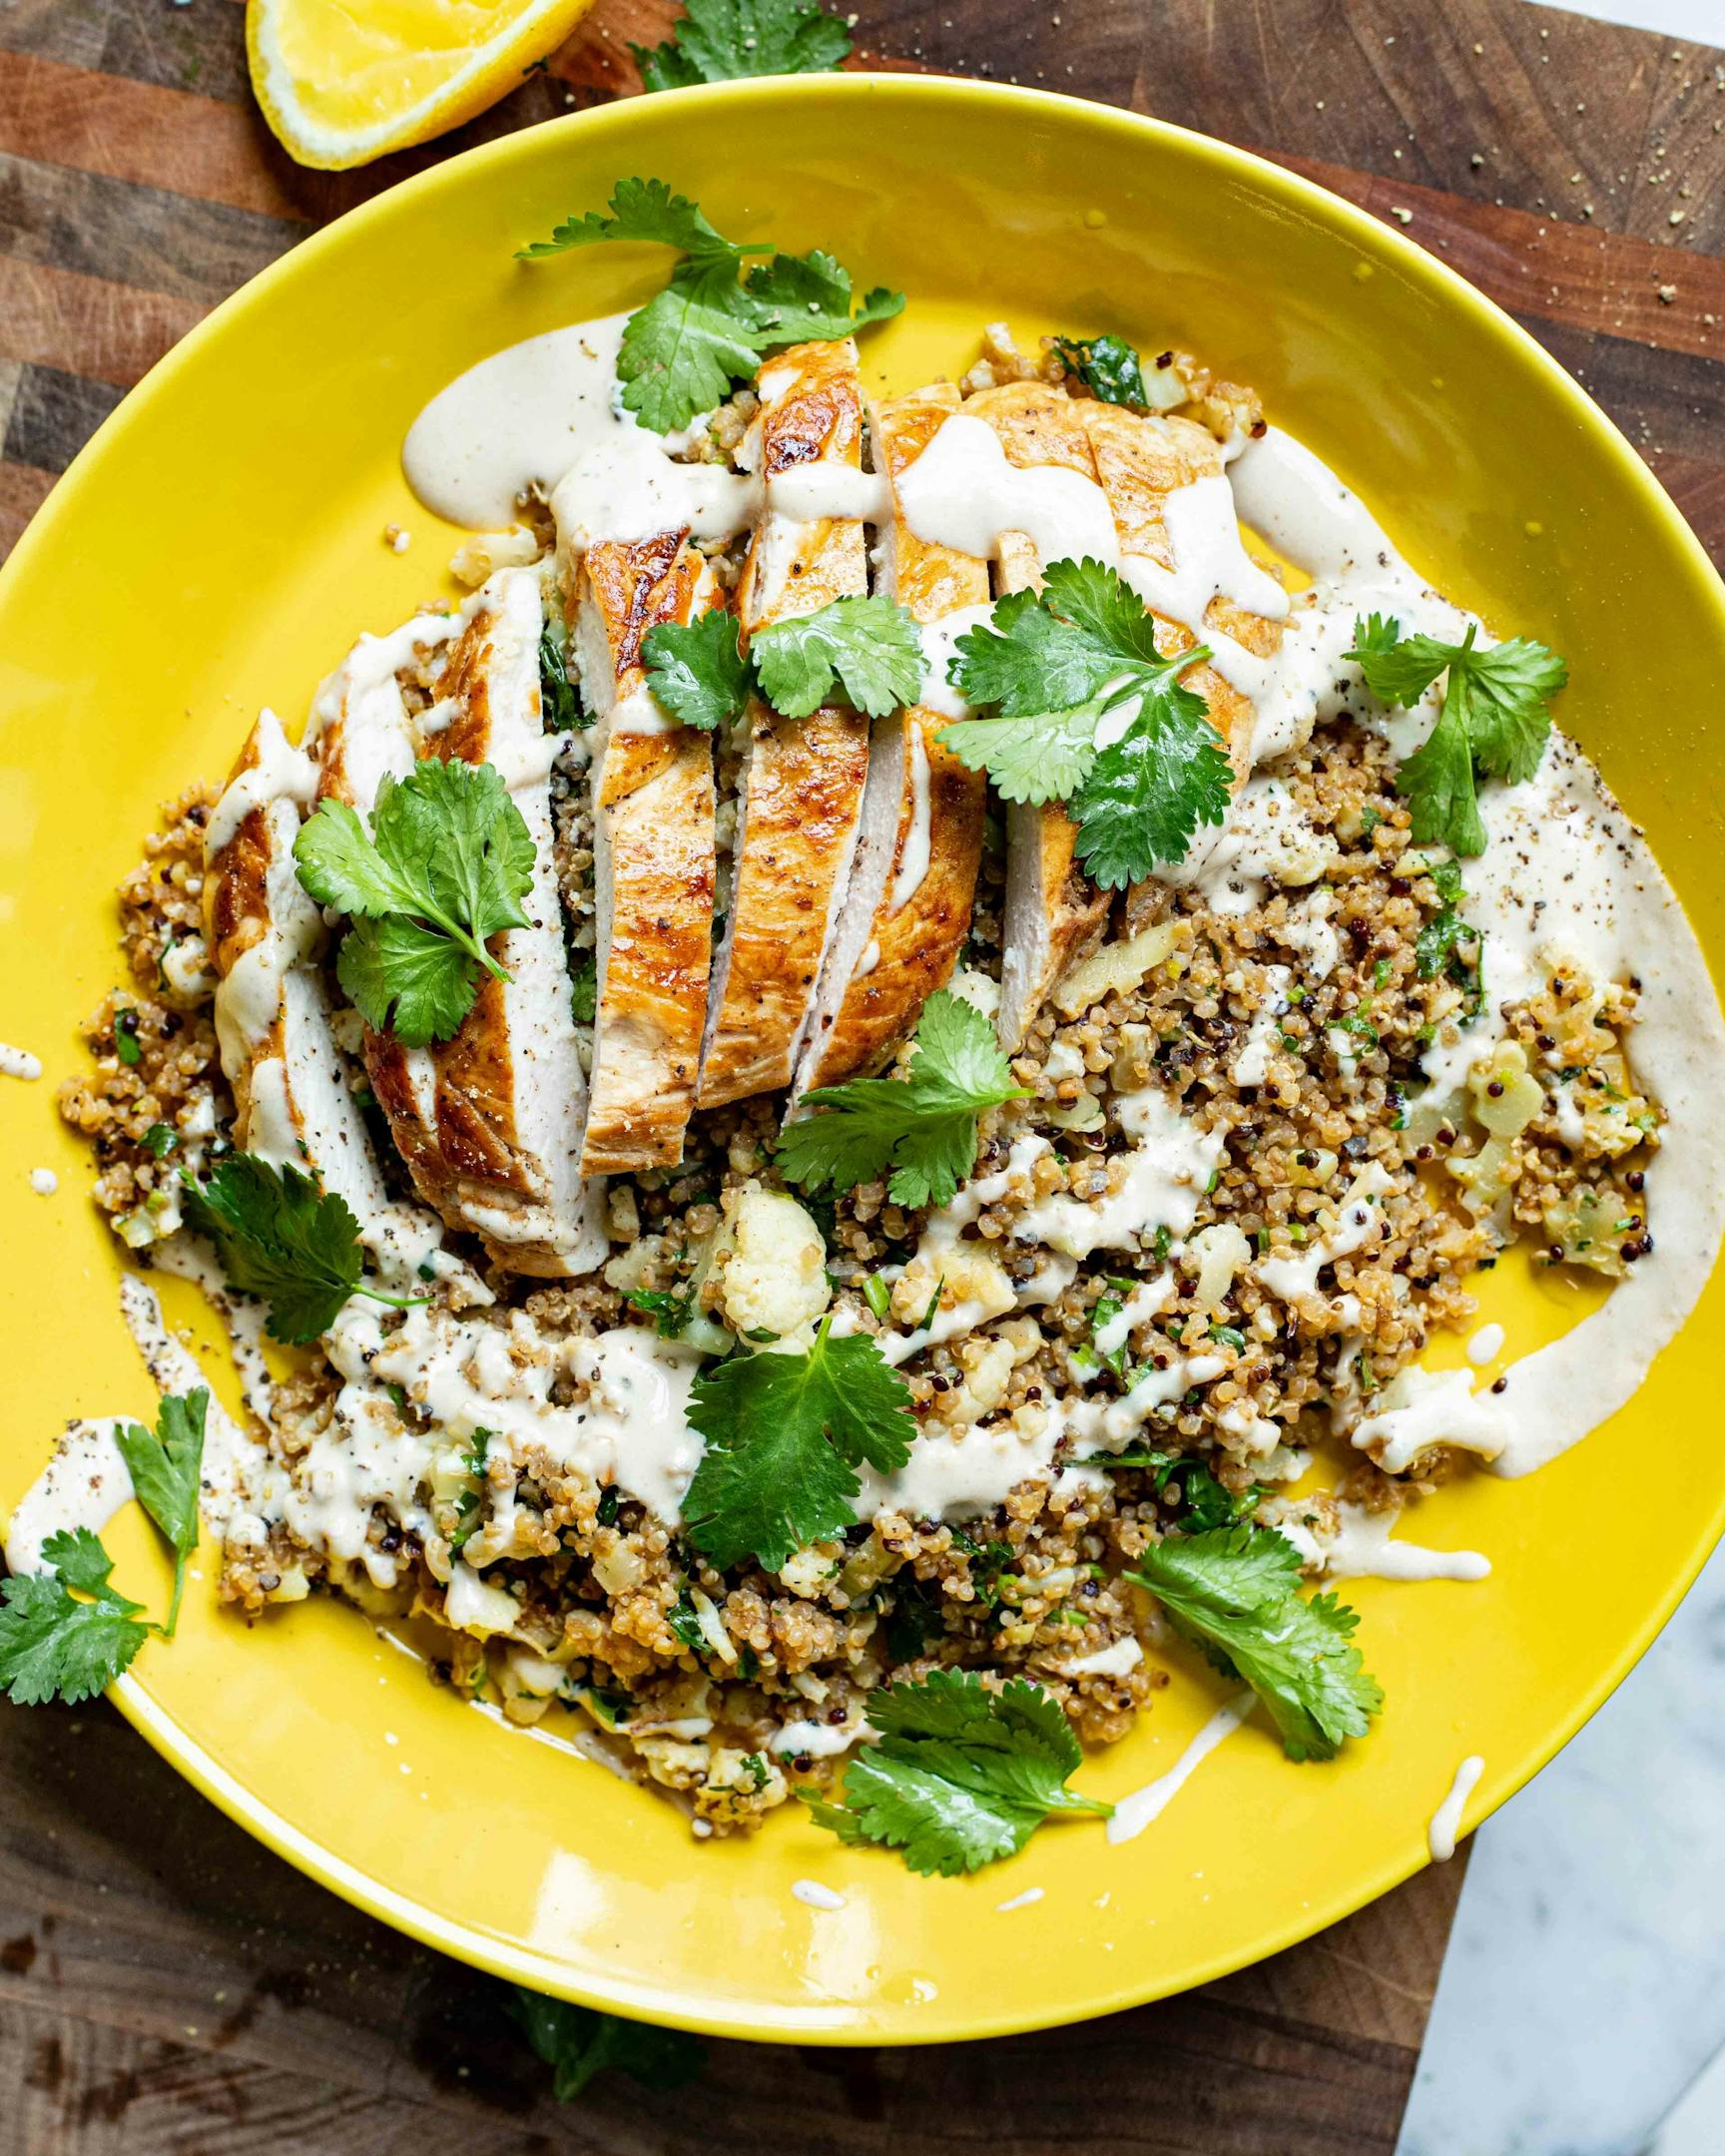 Chargrilled Chicken With Spiced Rice